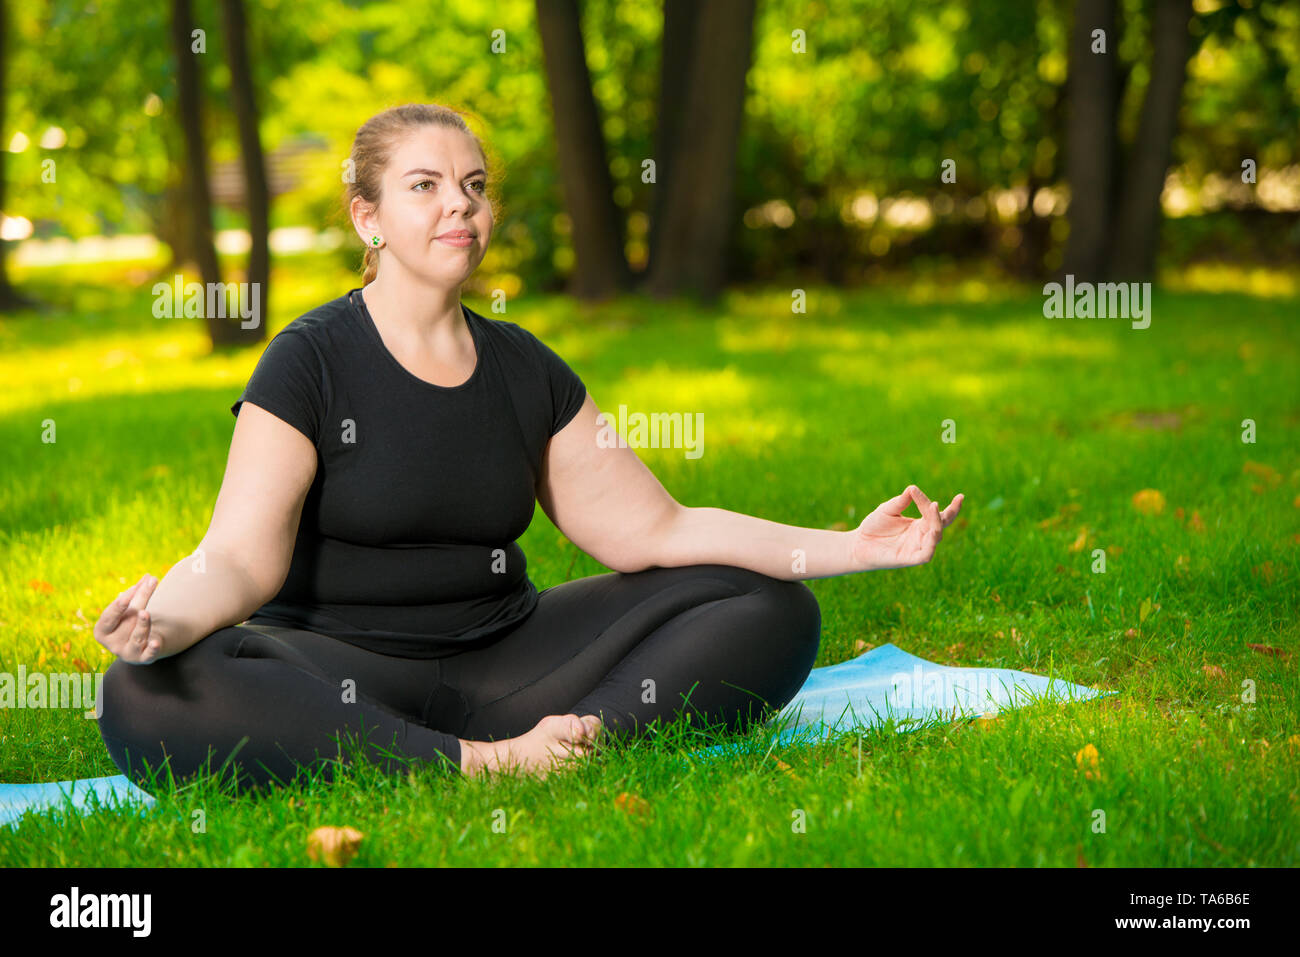 meditation in the park, a portrait of a focused model over size during a yoga workout Stock Photo